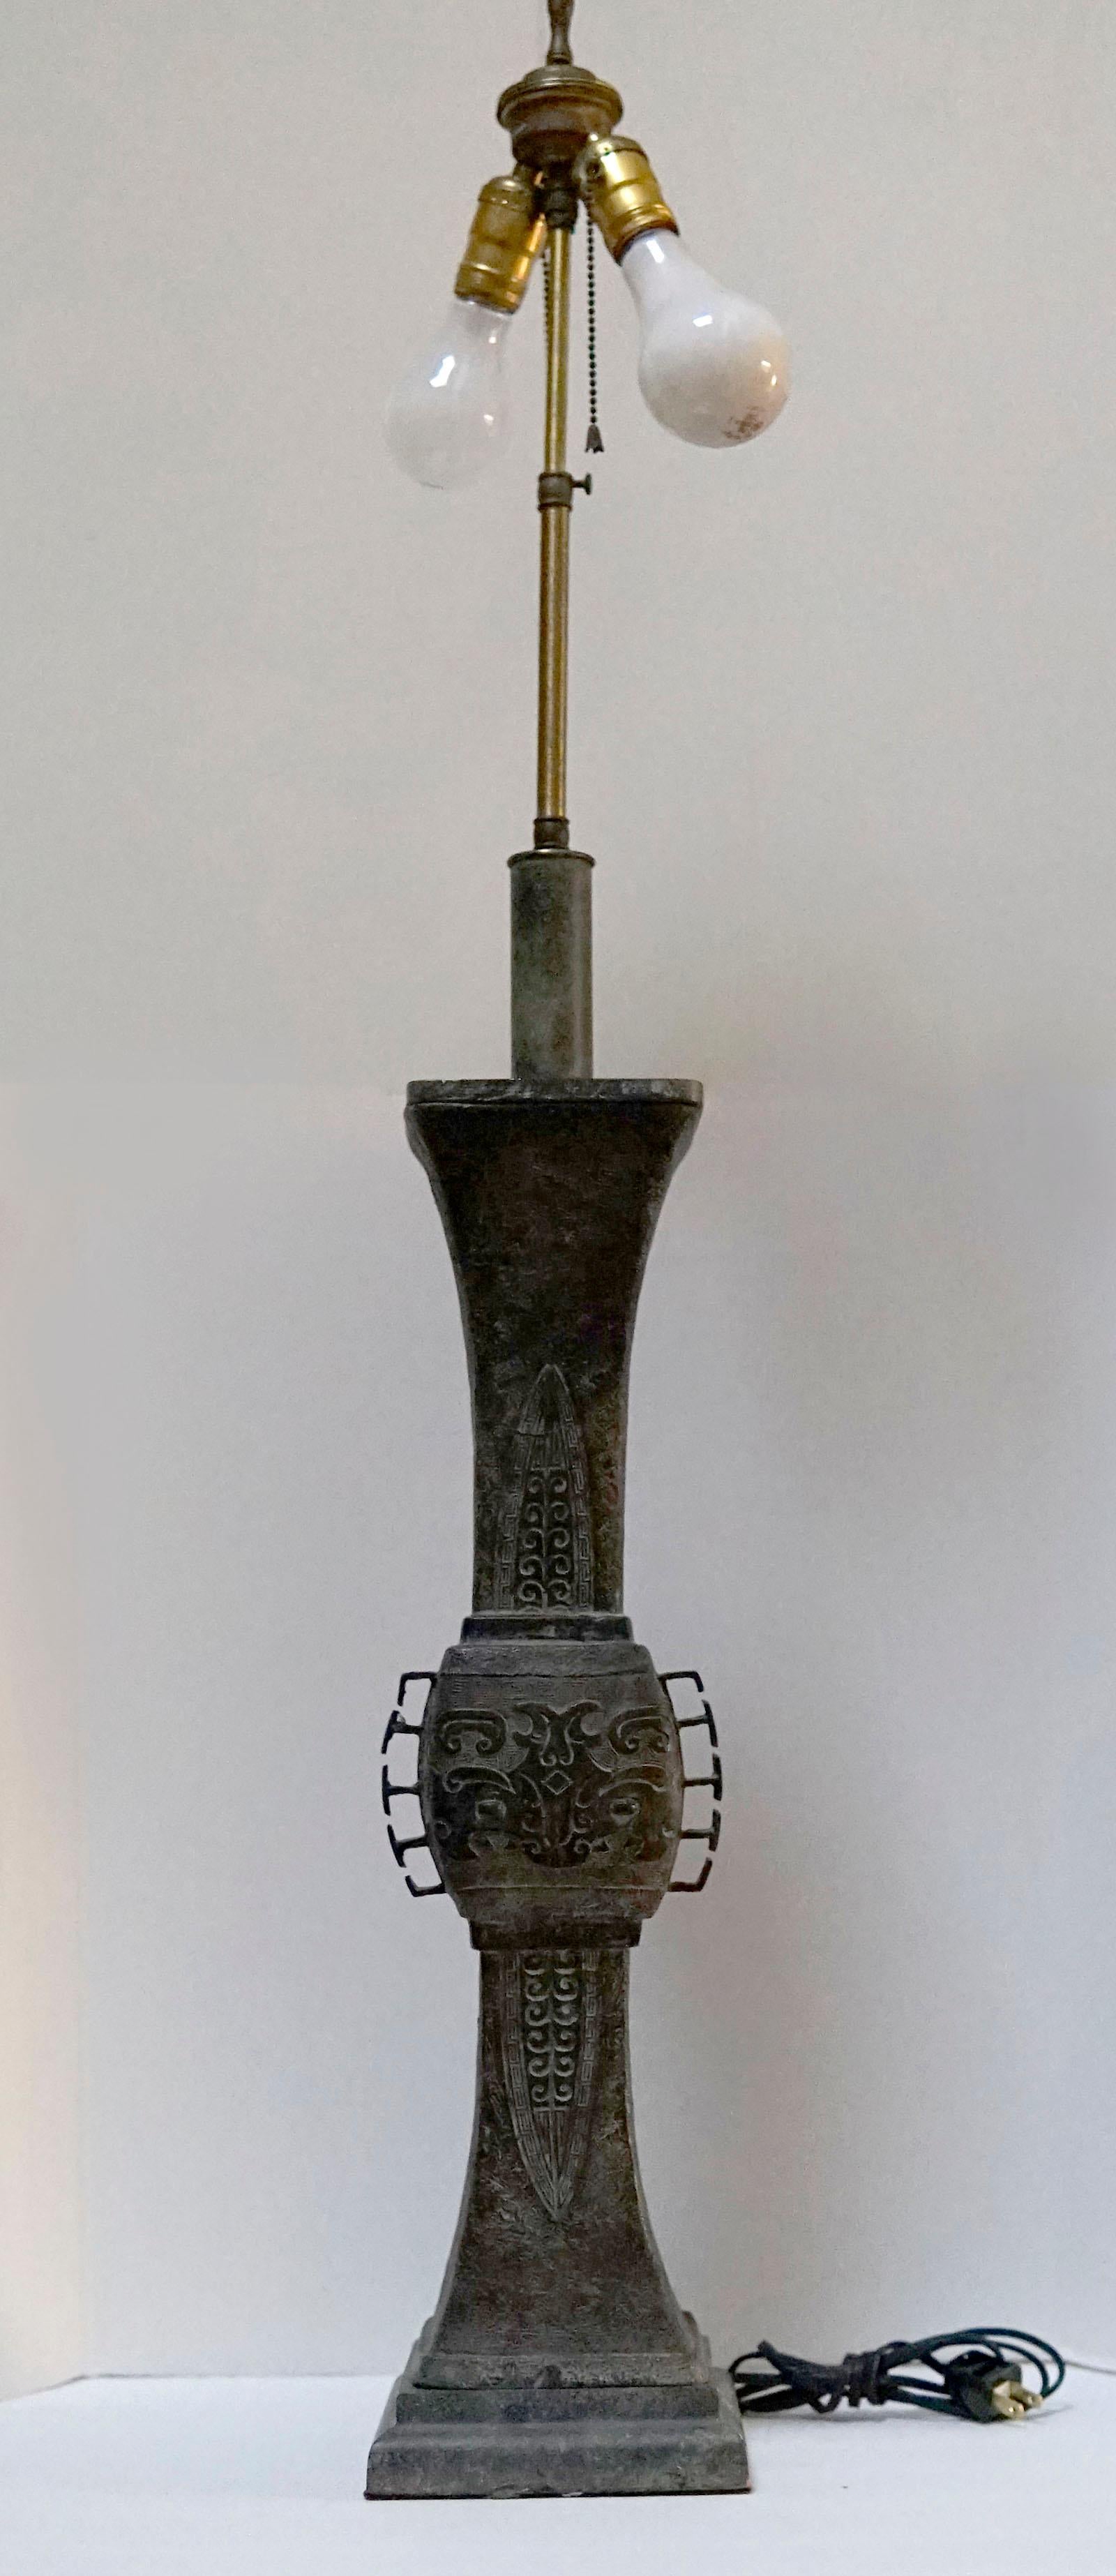 The attenuated silhouette of this late 19th century bronze table lamp turns heads. It is an antique Asian archaic style bronze. The intricate carving and the oxidized bronze color speak to age and quality. It is similar to the mid-century lamps